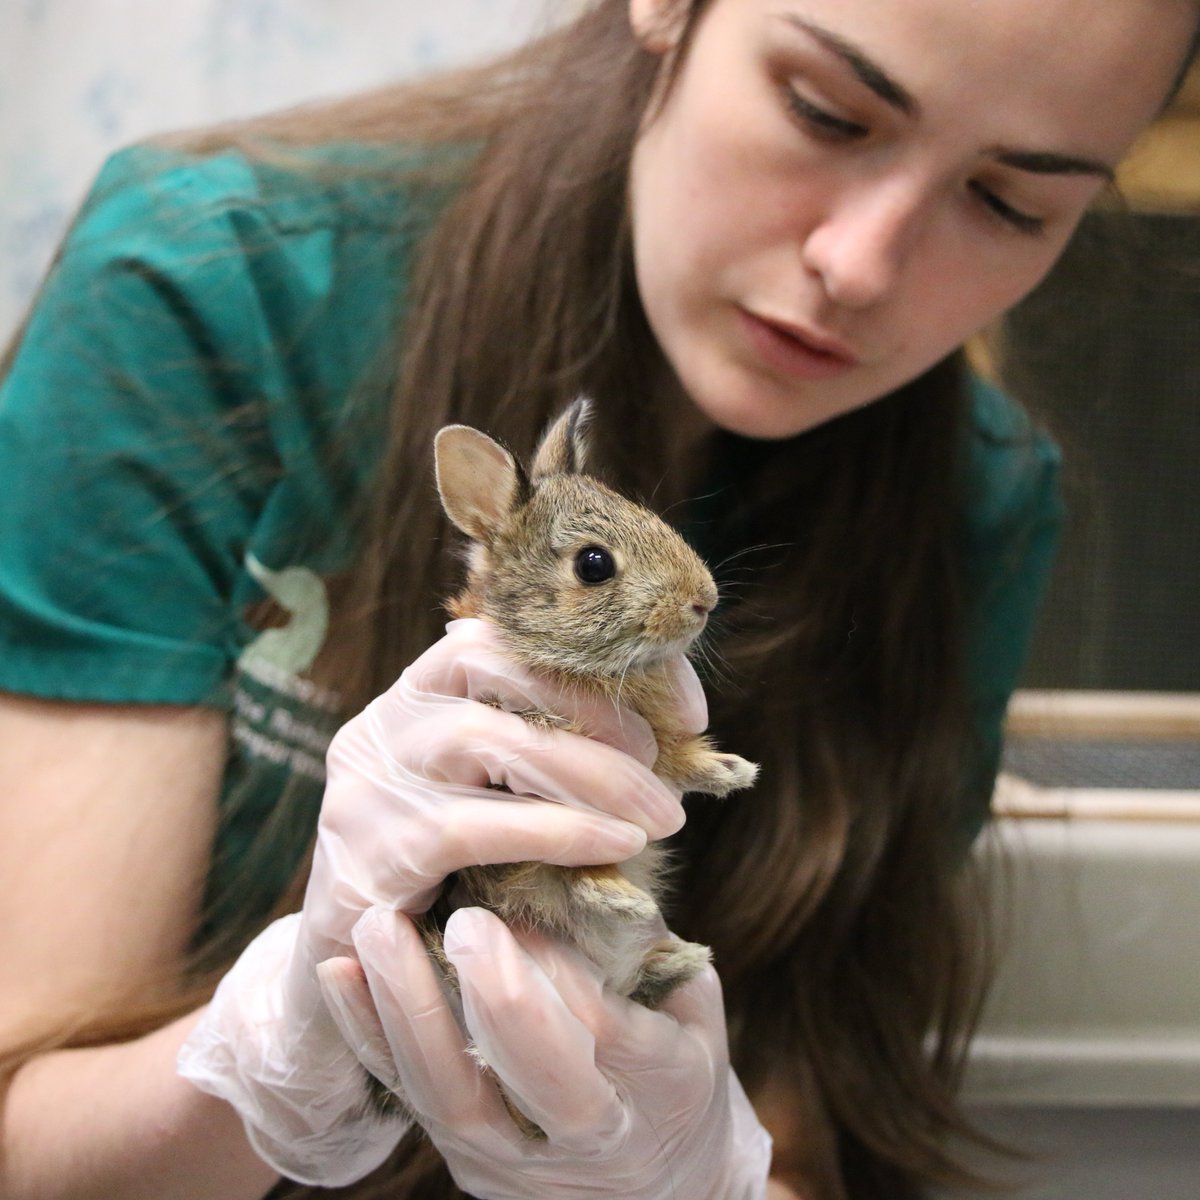 Until June 30th, every dollar donated to TWC through @canadahelps enters us to win $20,000 to help our wild neighbours! That means more support for patients like #EasternCottontail orphans who need someone to care for them💚
Retweet to spread the word!
canadahelps.org/en/charities/t…